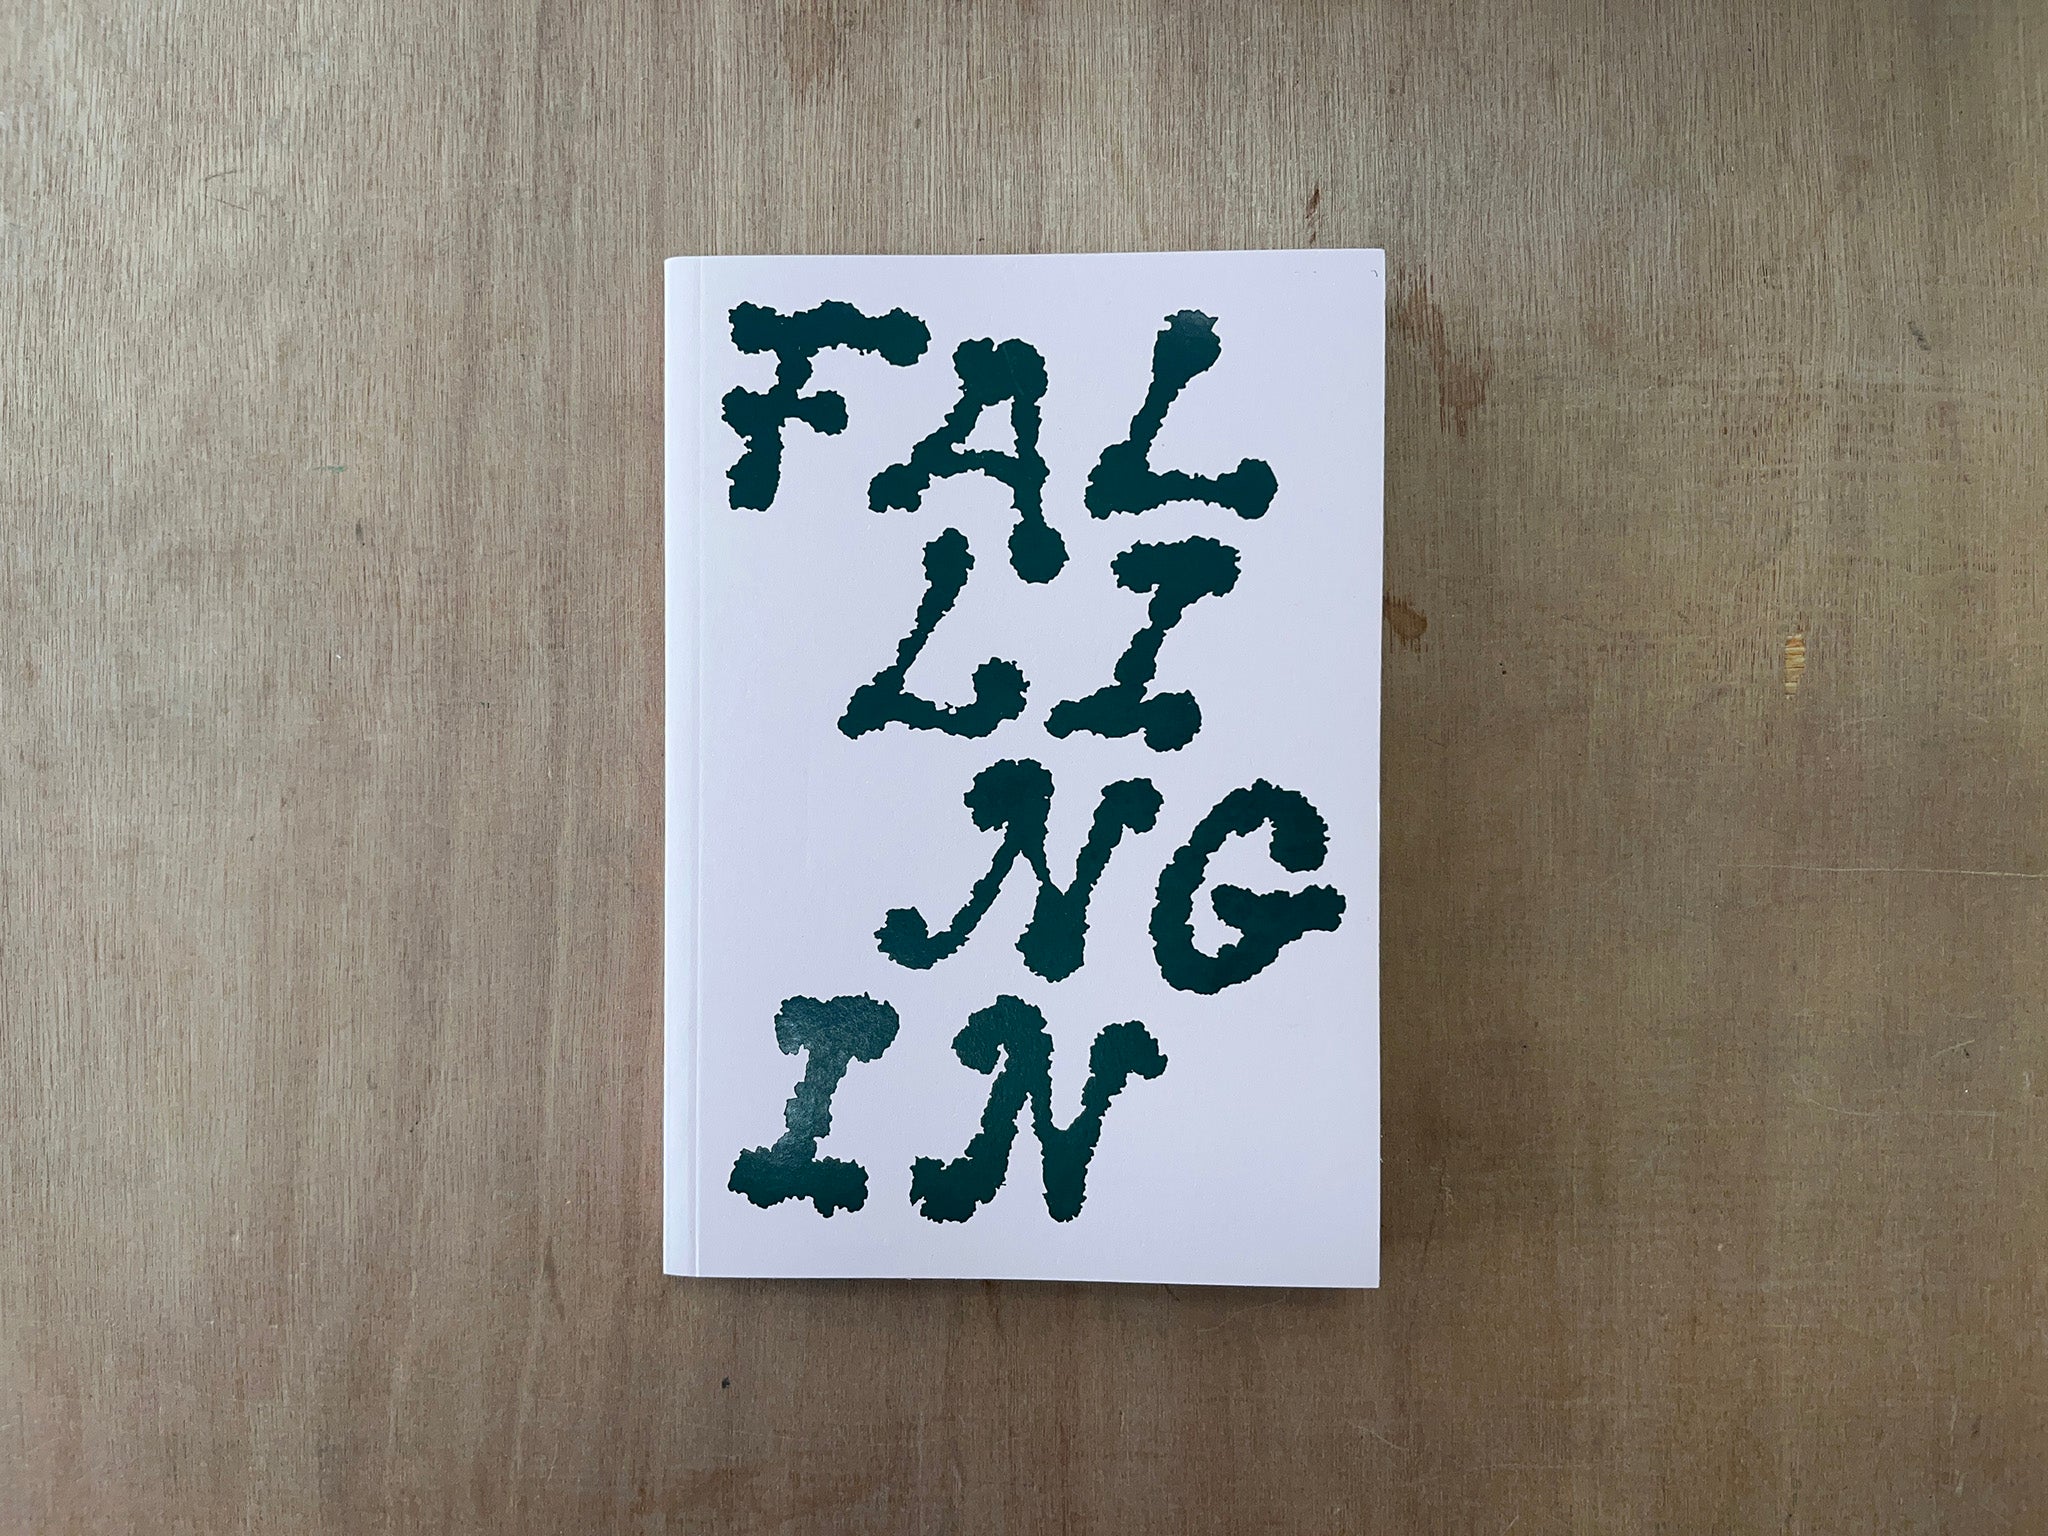 FALLING IN: MOVEMENT AND BECOMING IN CURATORIAL RESEARCH